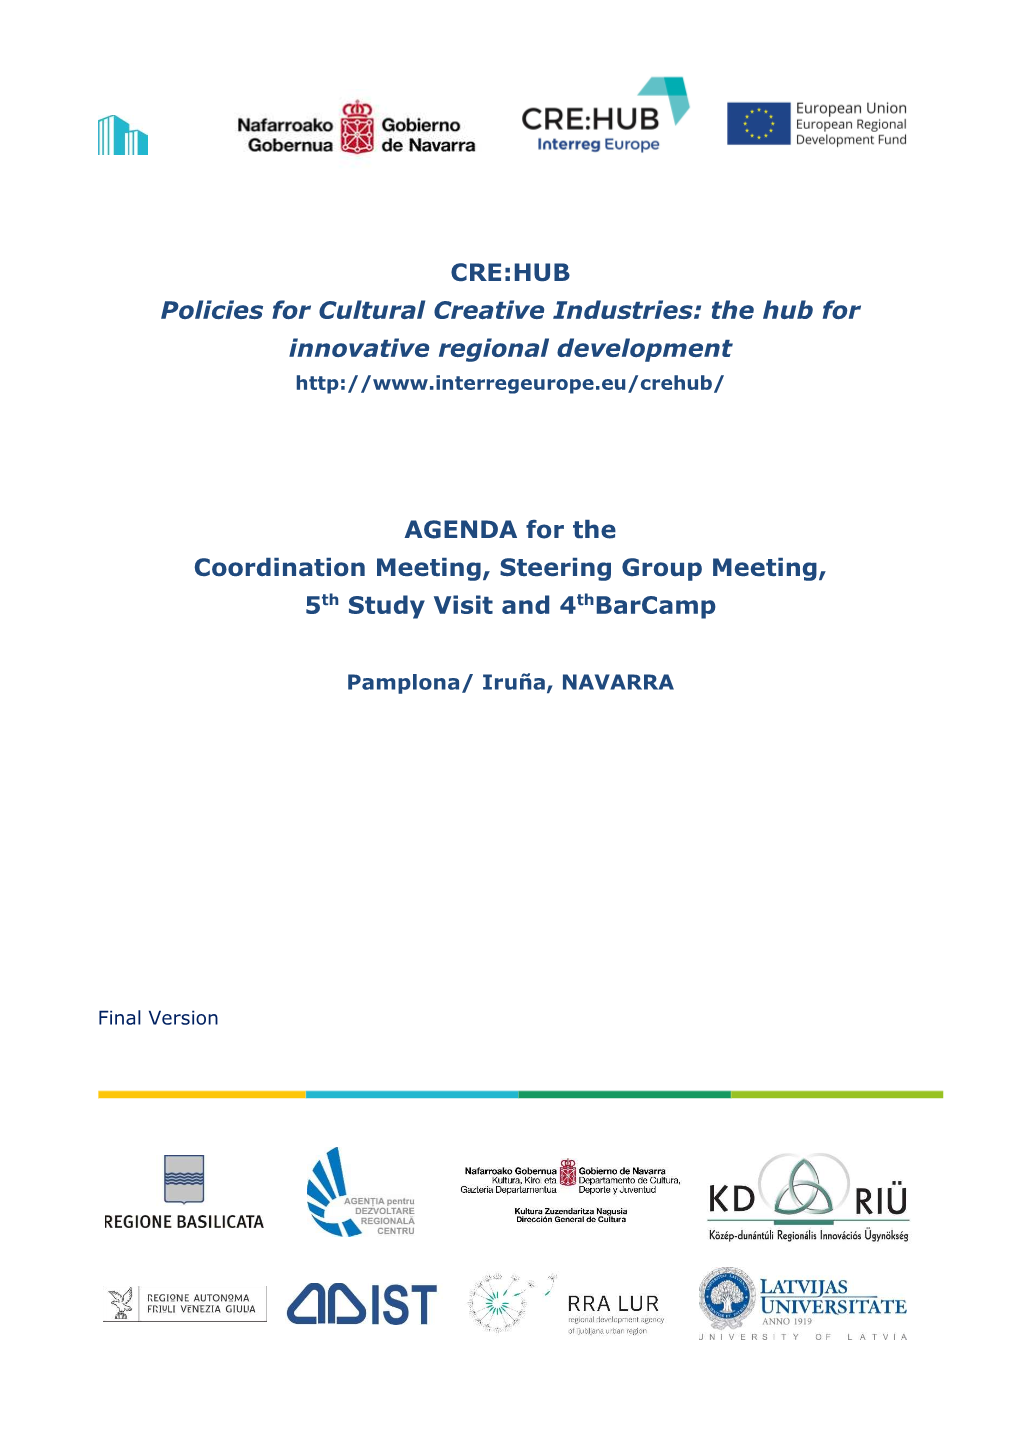 CRE:HUB Policies for Cultural Creative Industries: the Hub for Innovative Regional Development